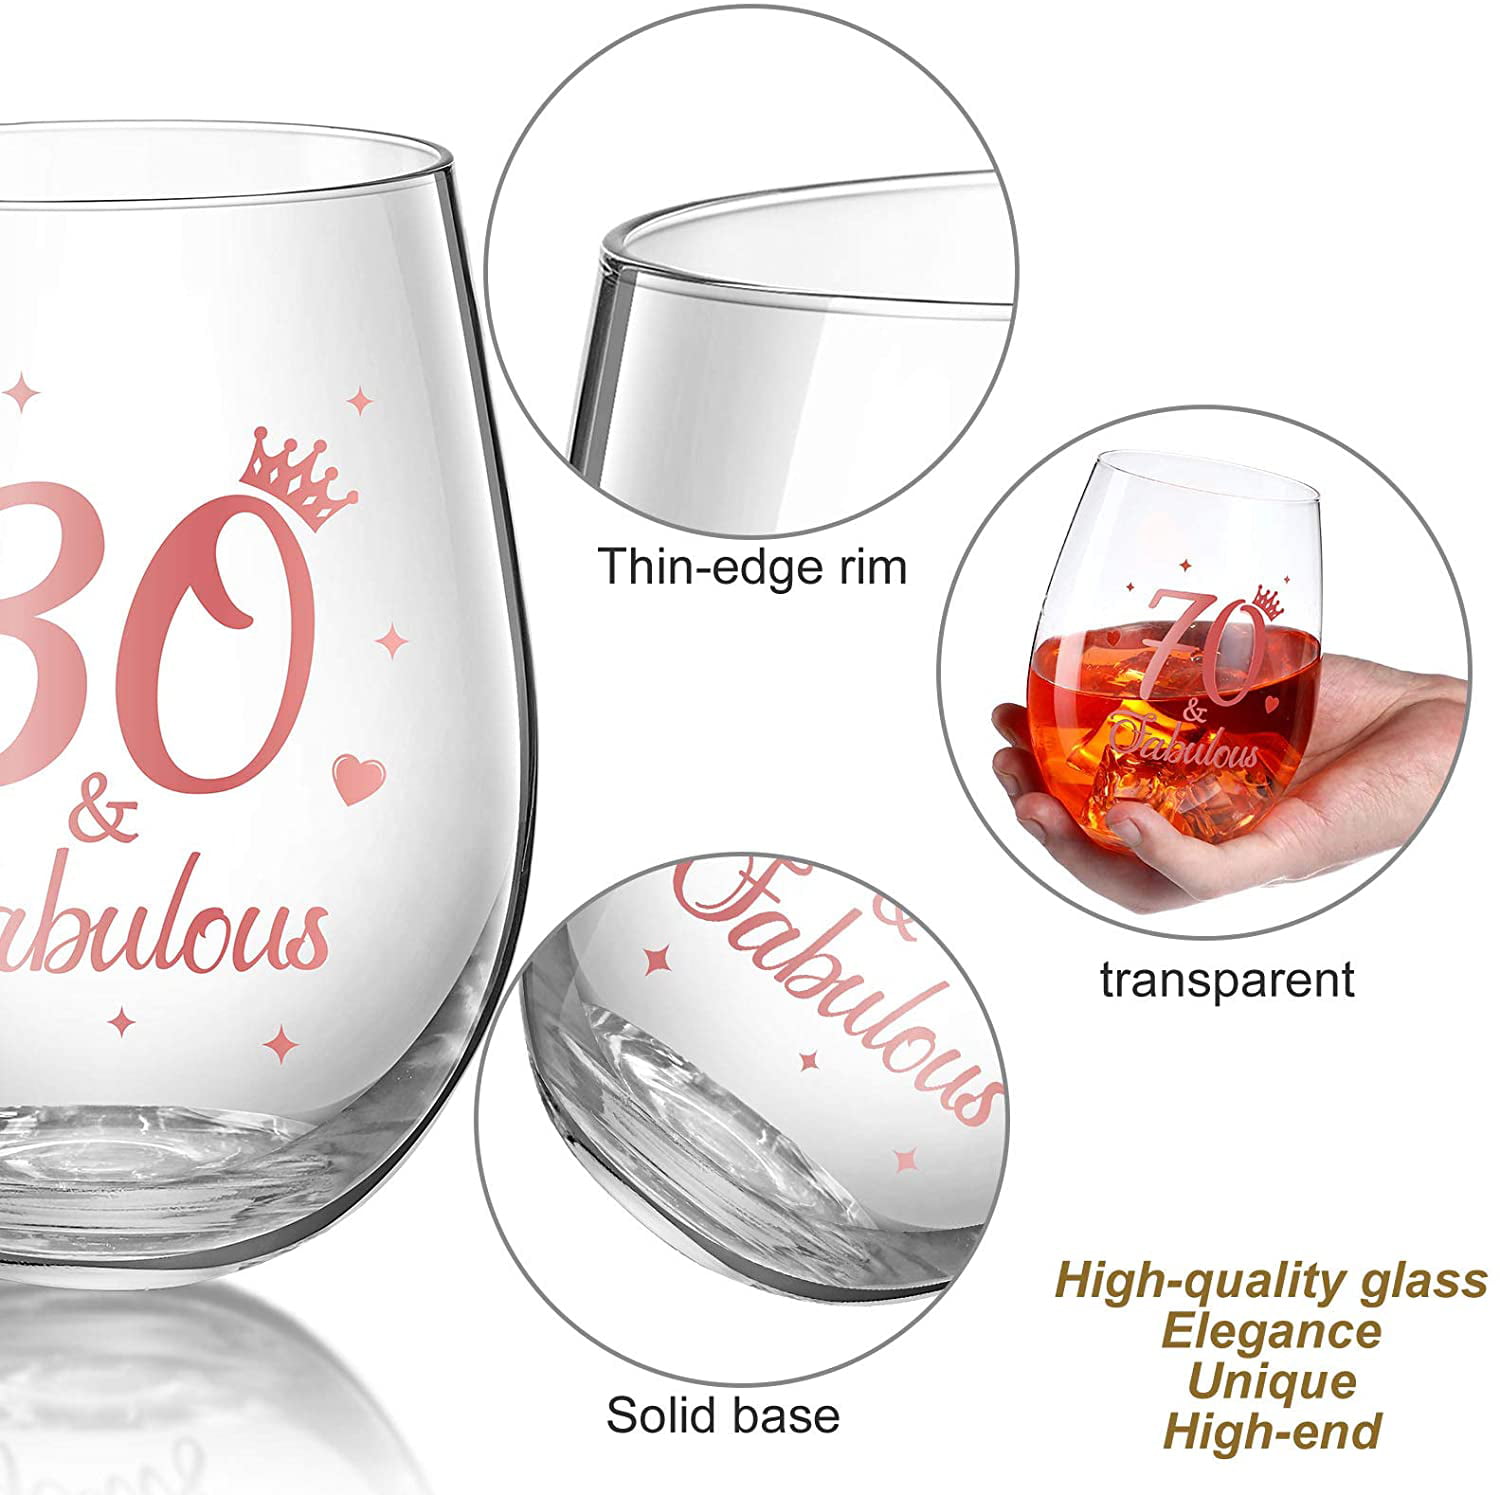 30 and Fabulous Stemless Wine Glass Rose Gold Birthday Wine Glass Present Anniversary Glasses for Man Women Birthday Party Wedding Anniversary Decorations 17 oz